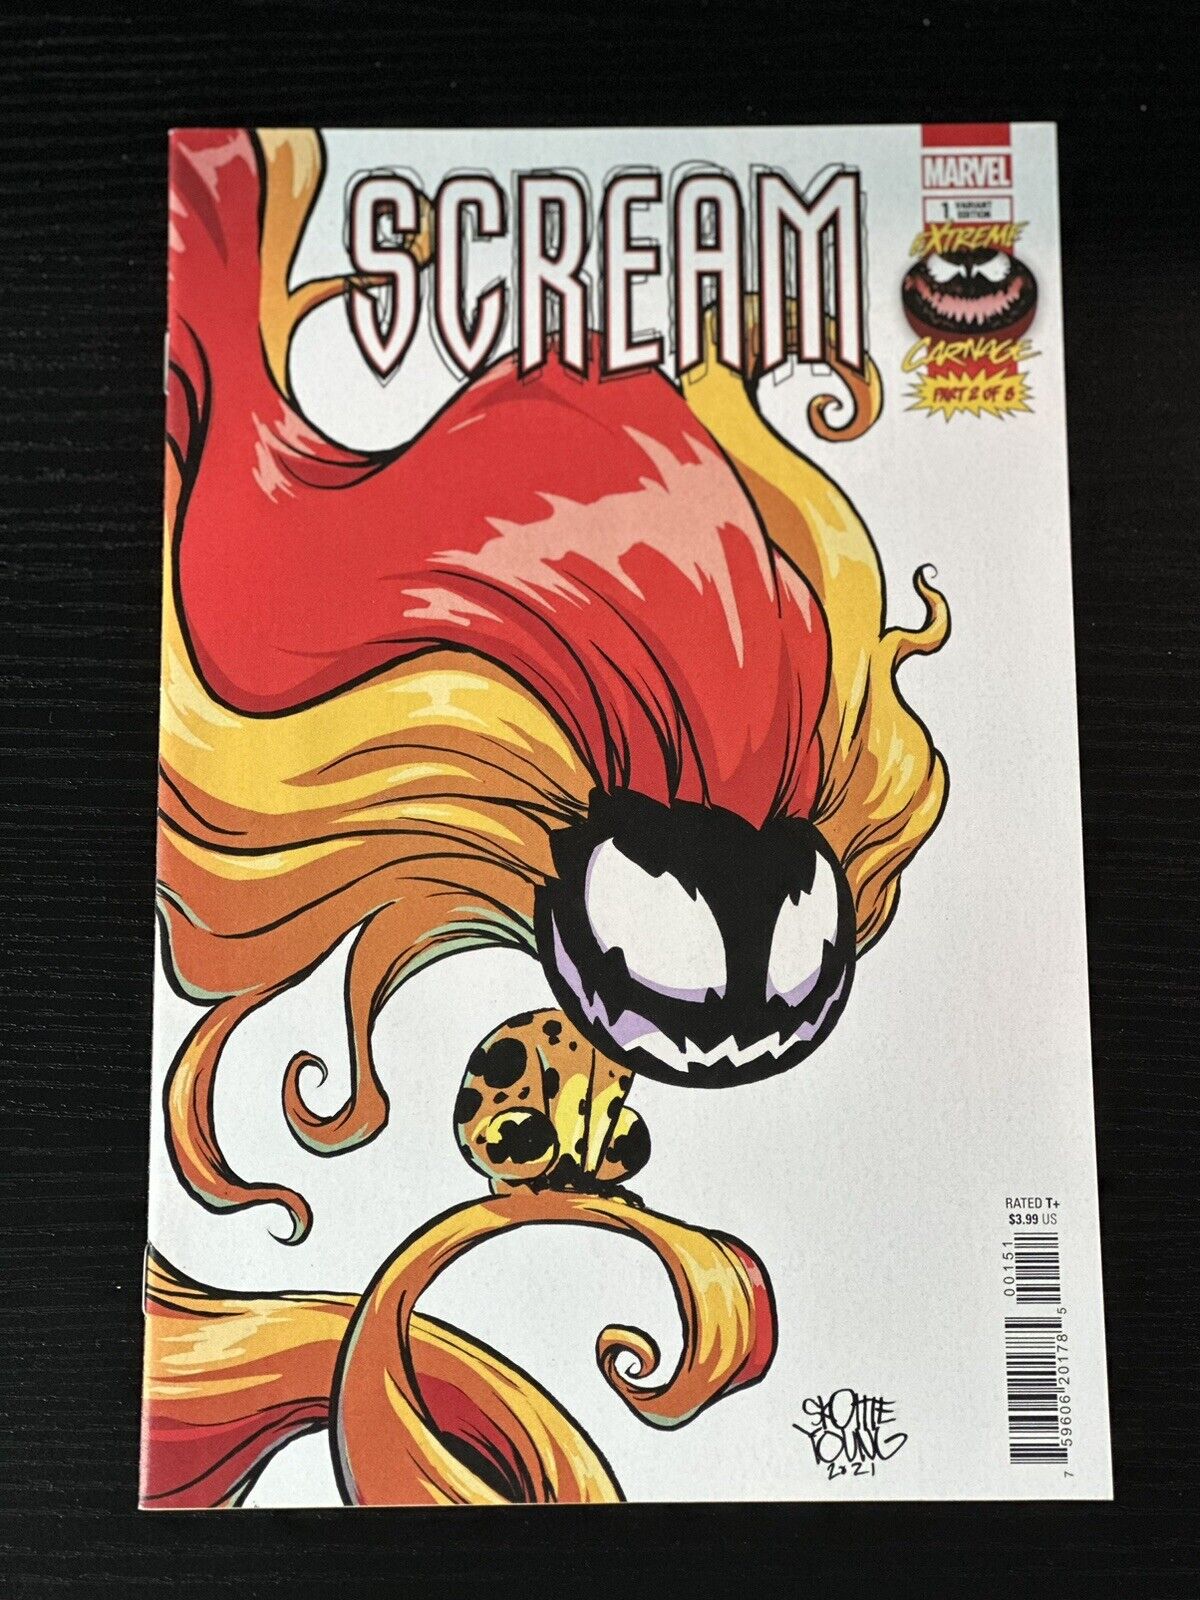 Marvel Comics EXTREME CARNAGE: SCREAM #1 SKOTTIE YOUNG Variant Cover